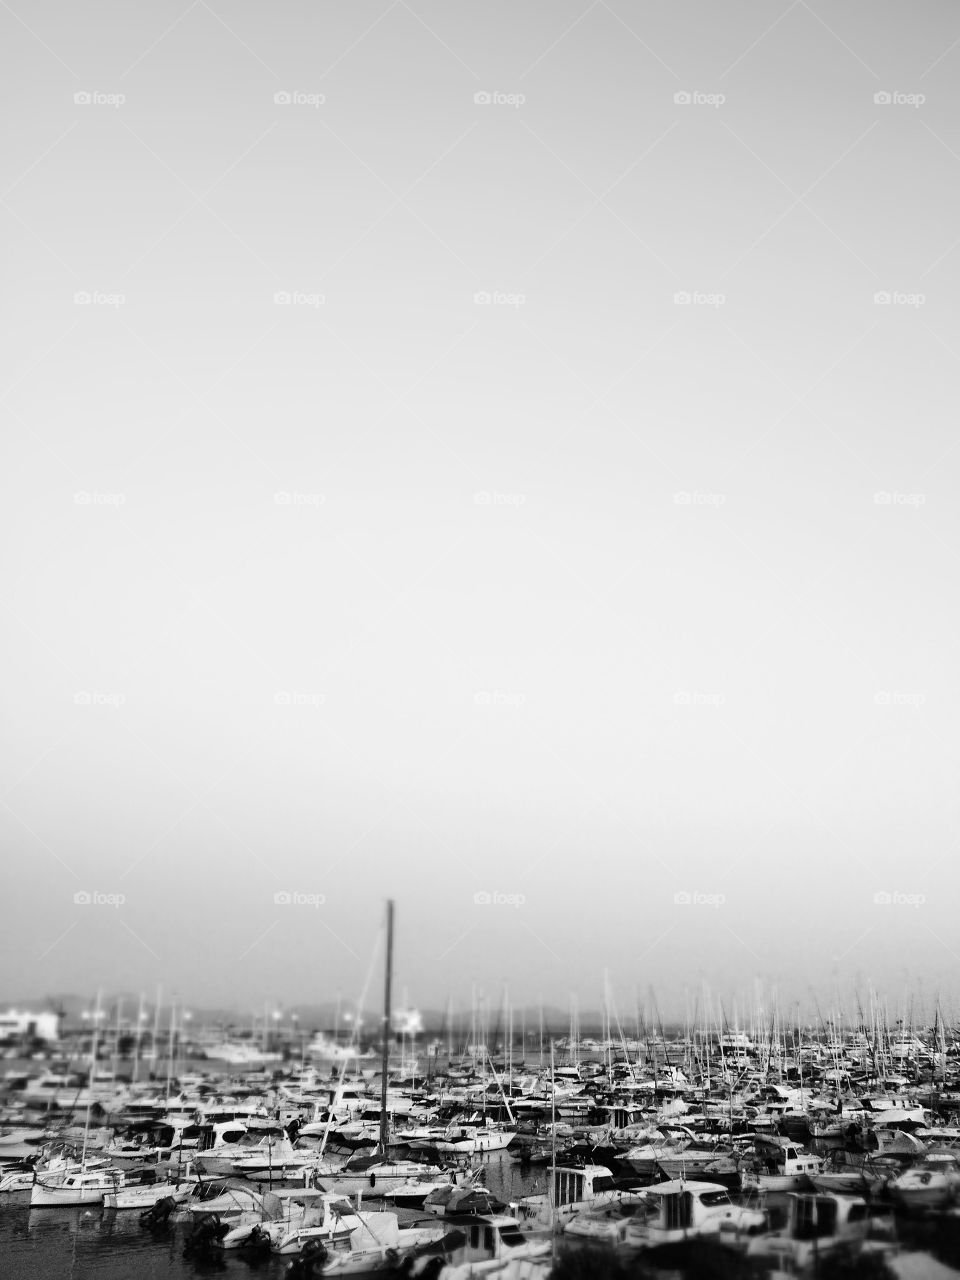 boats port black and white spain by zackariasl